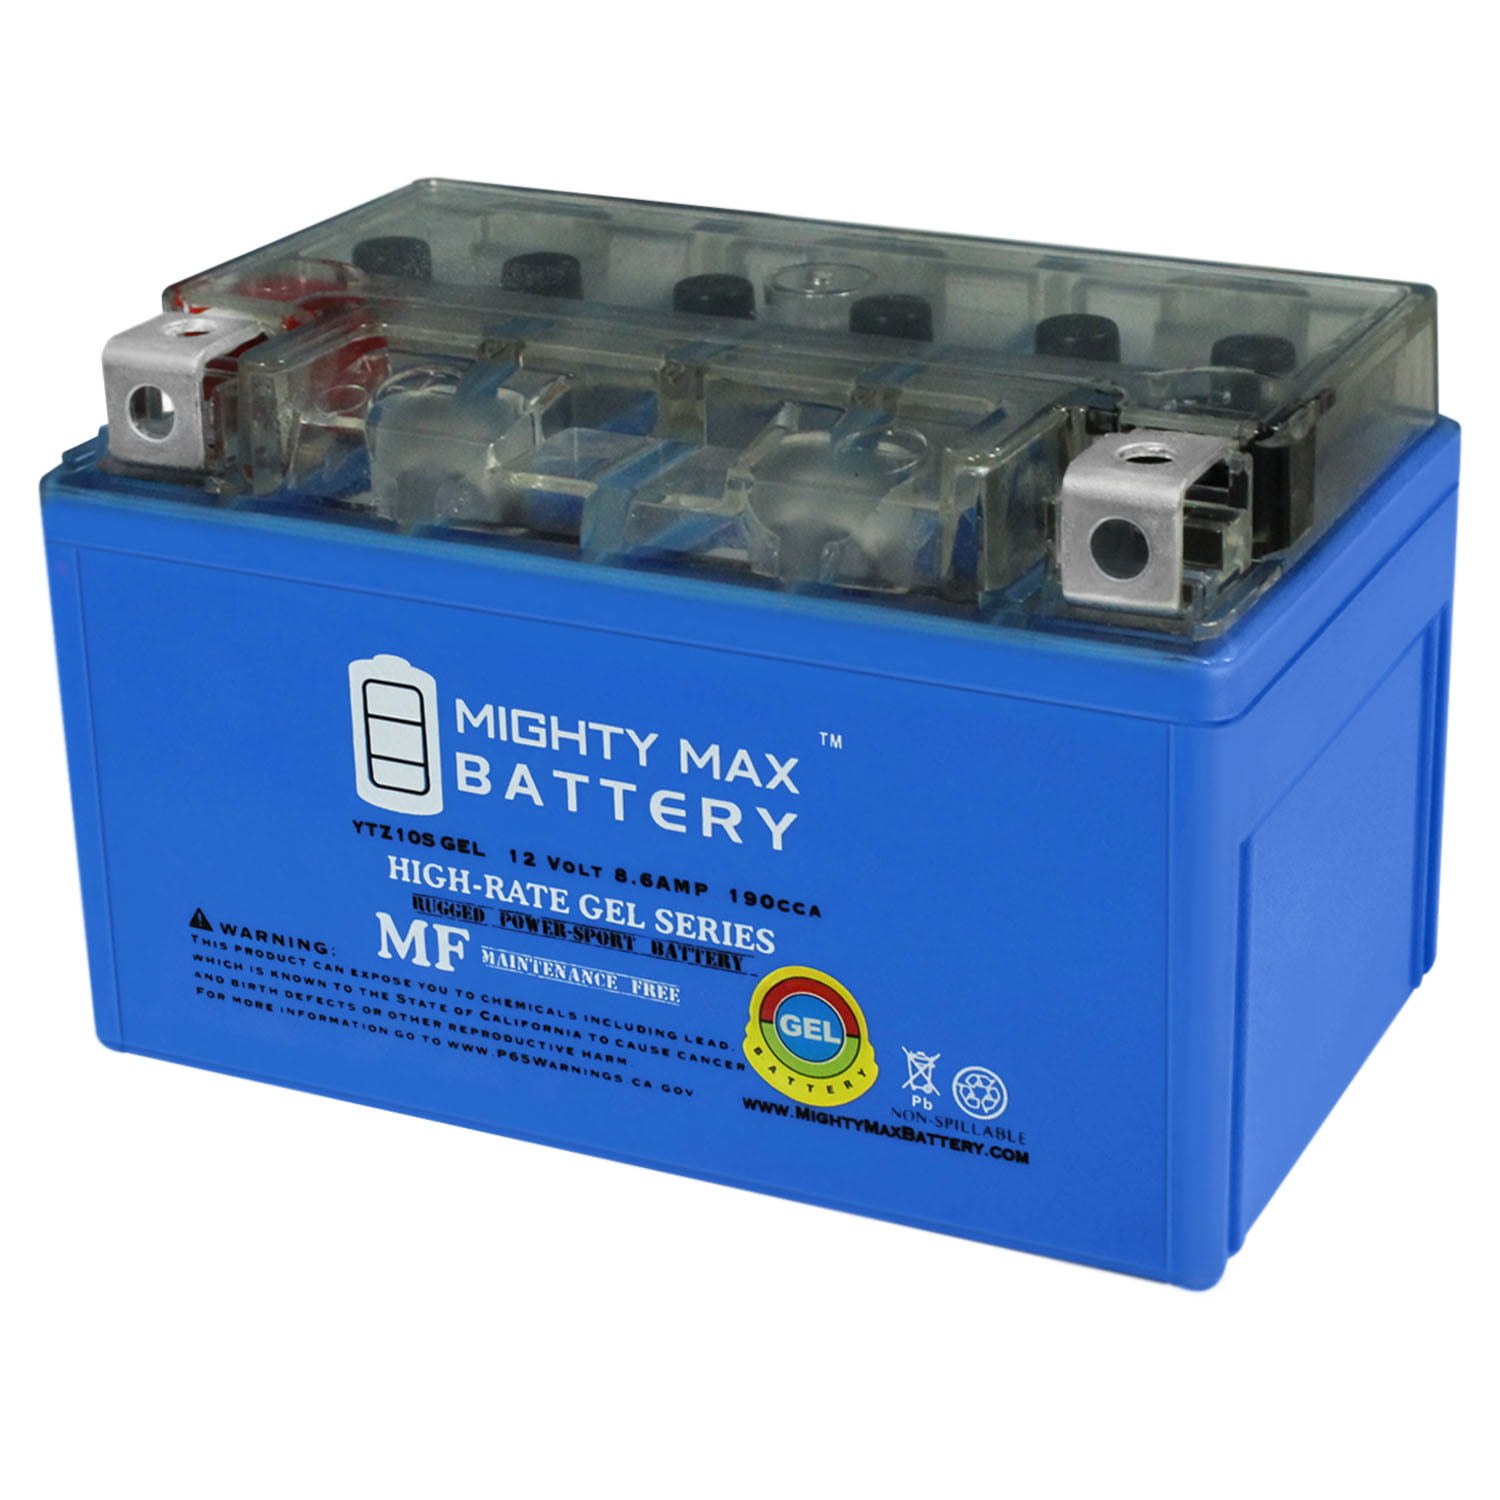 2113-0089 Part Unlimited AGM Factory Activated Maintenance-Free Battery YTZ10S